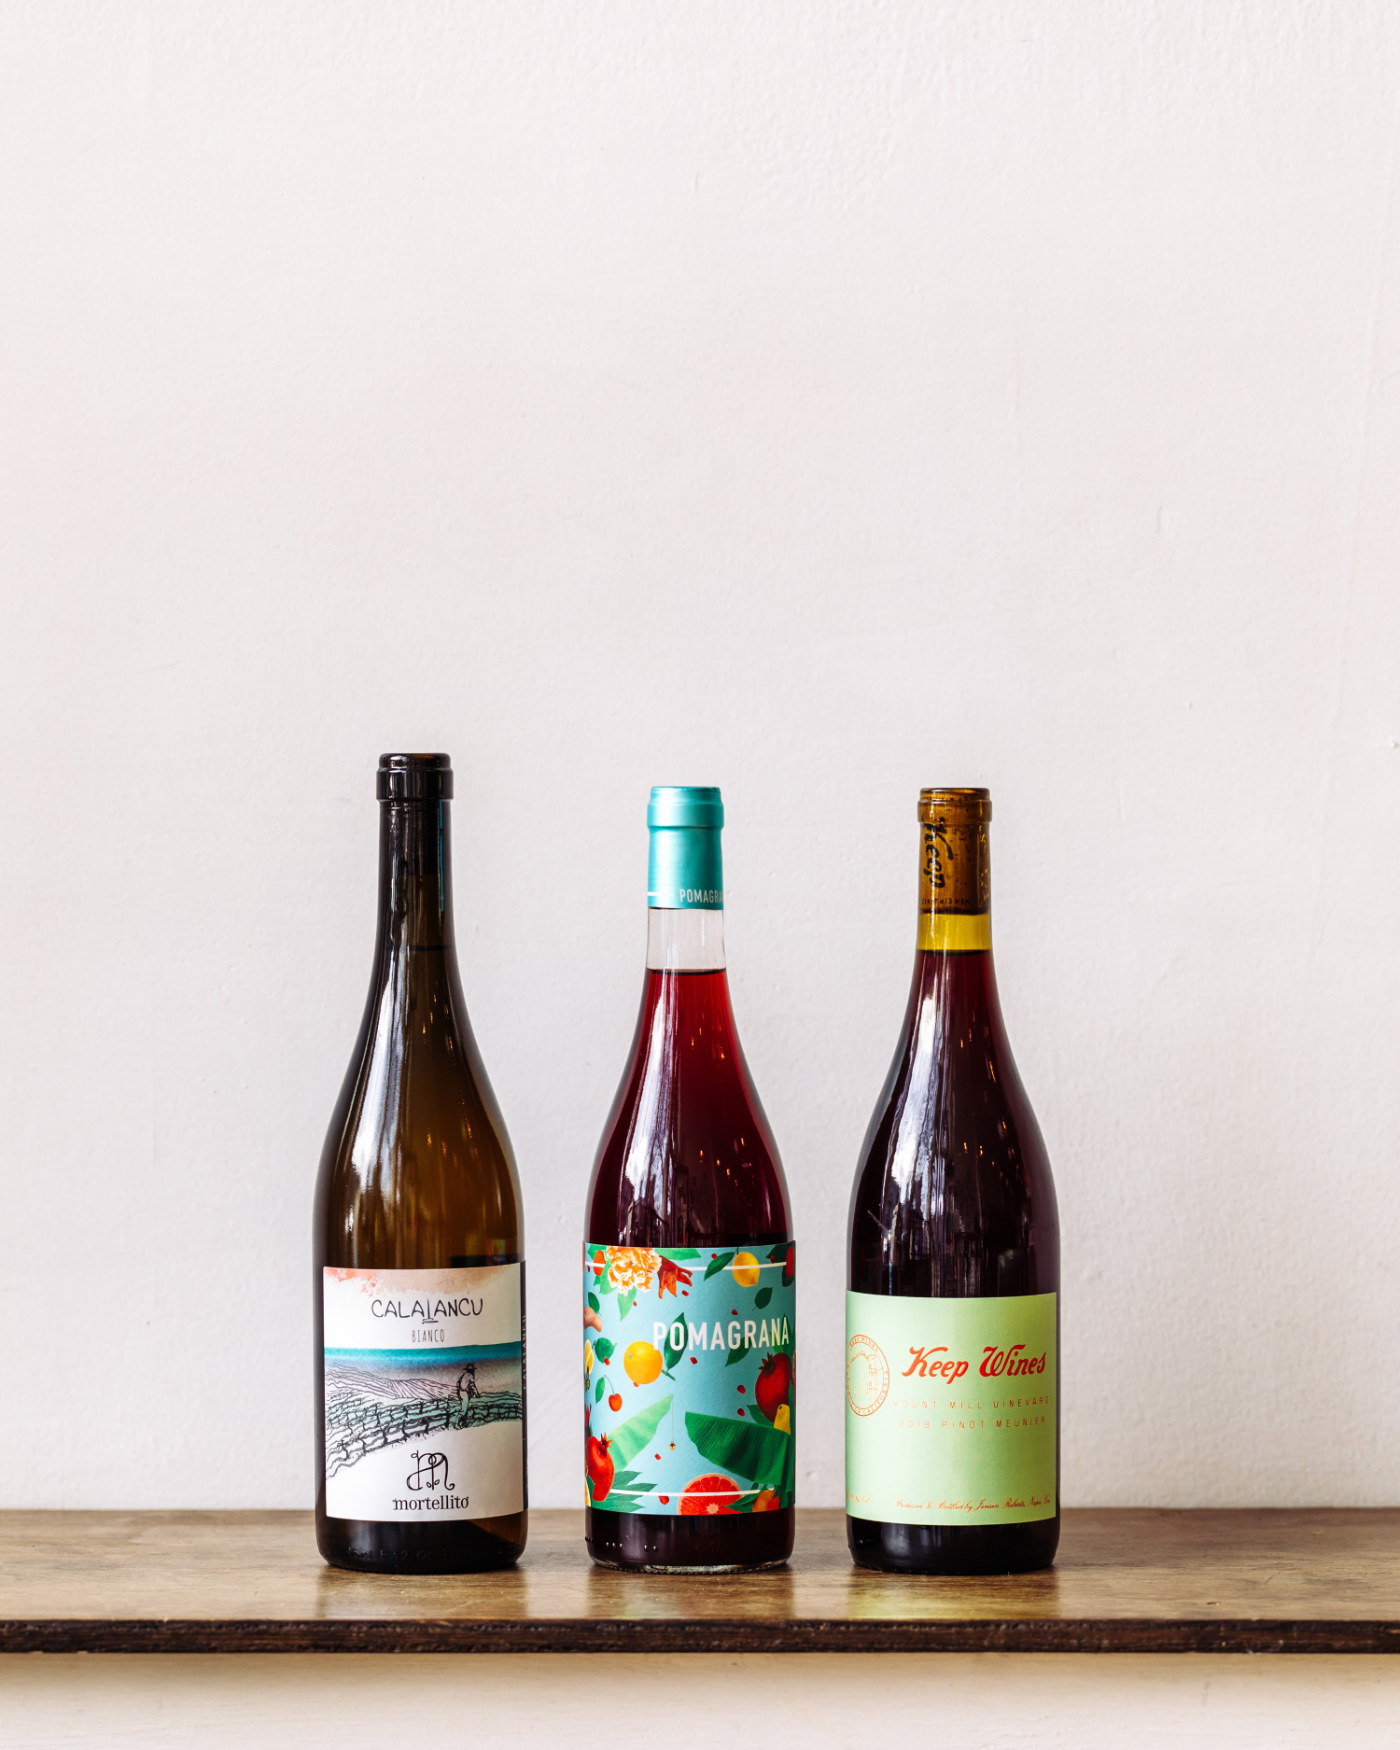 Preview of sample club wines